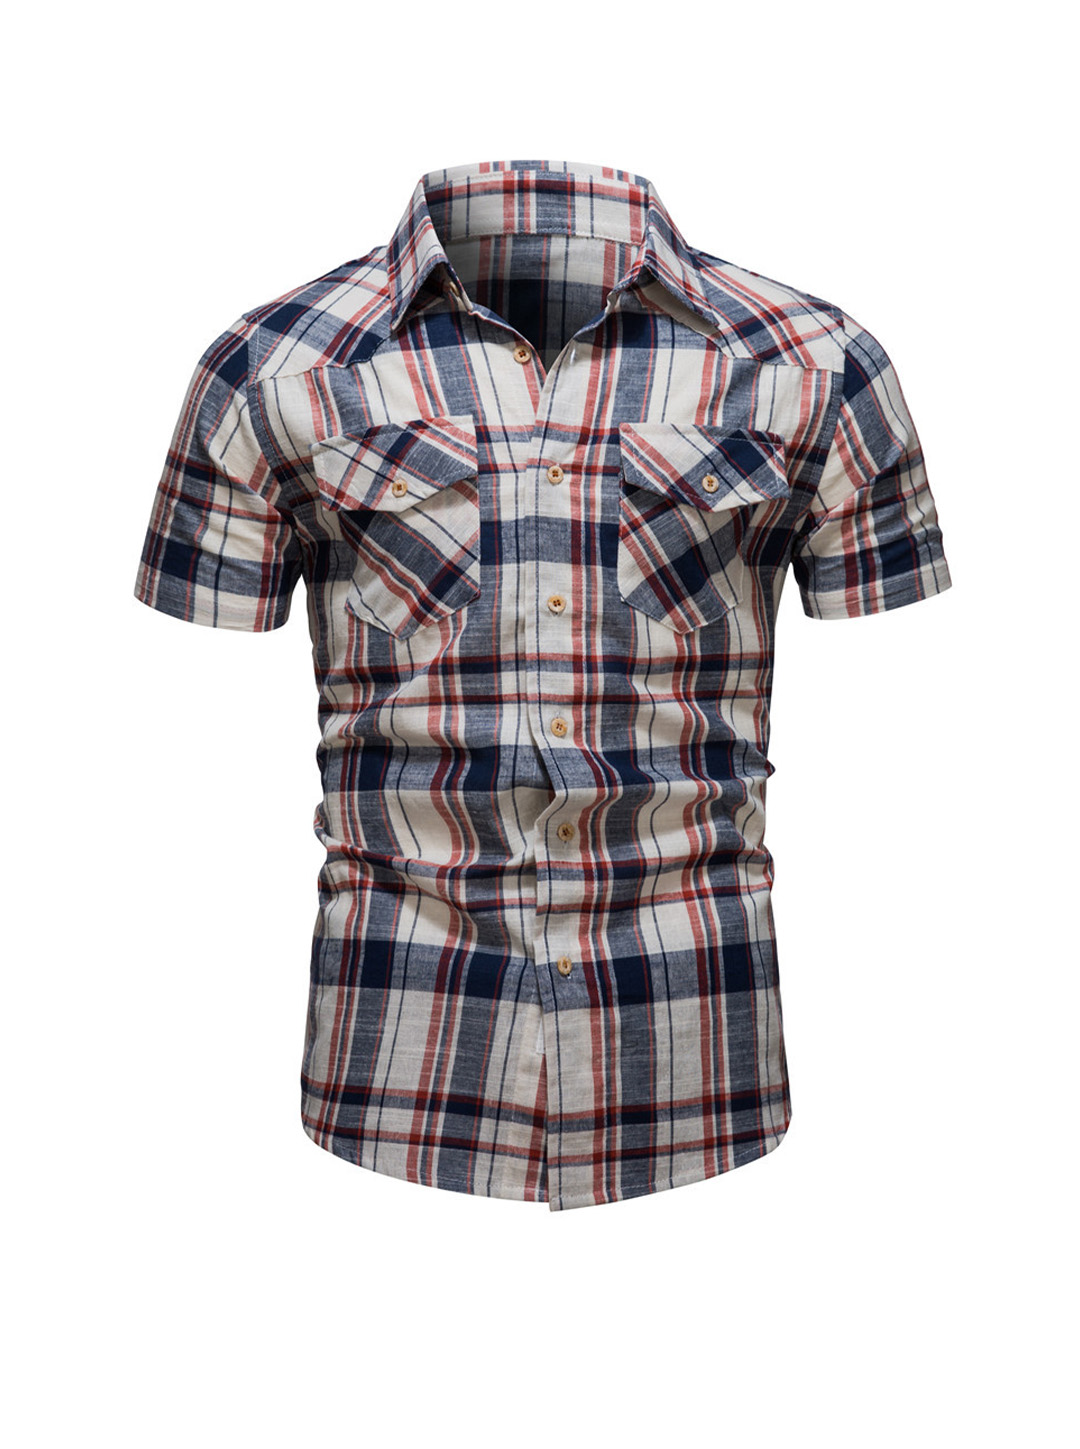 Men's William Casual Double Pocket Check Shirt-poisonstreetwear.com